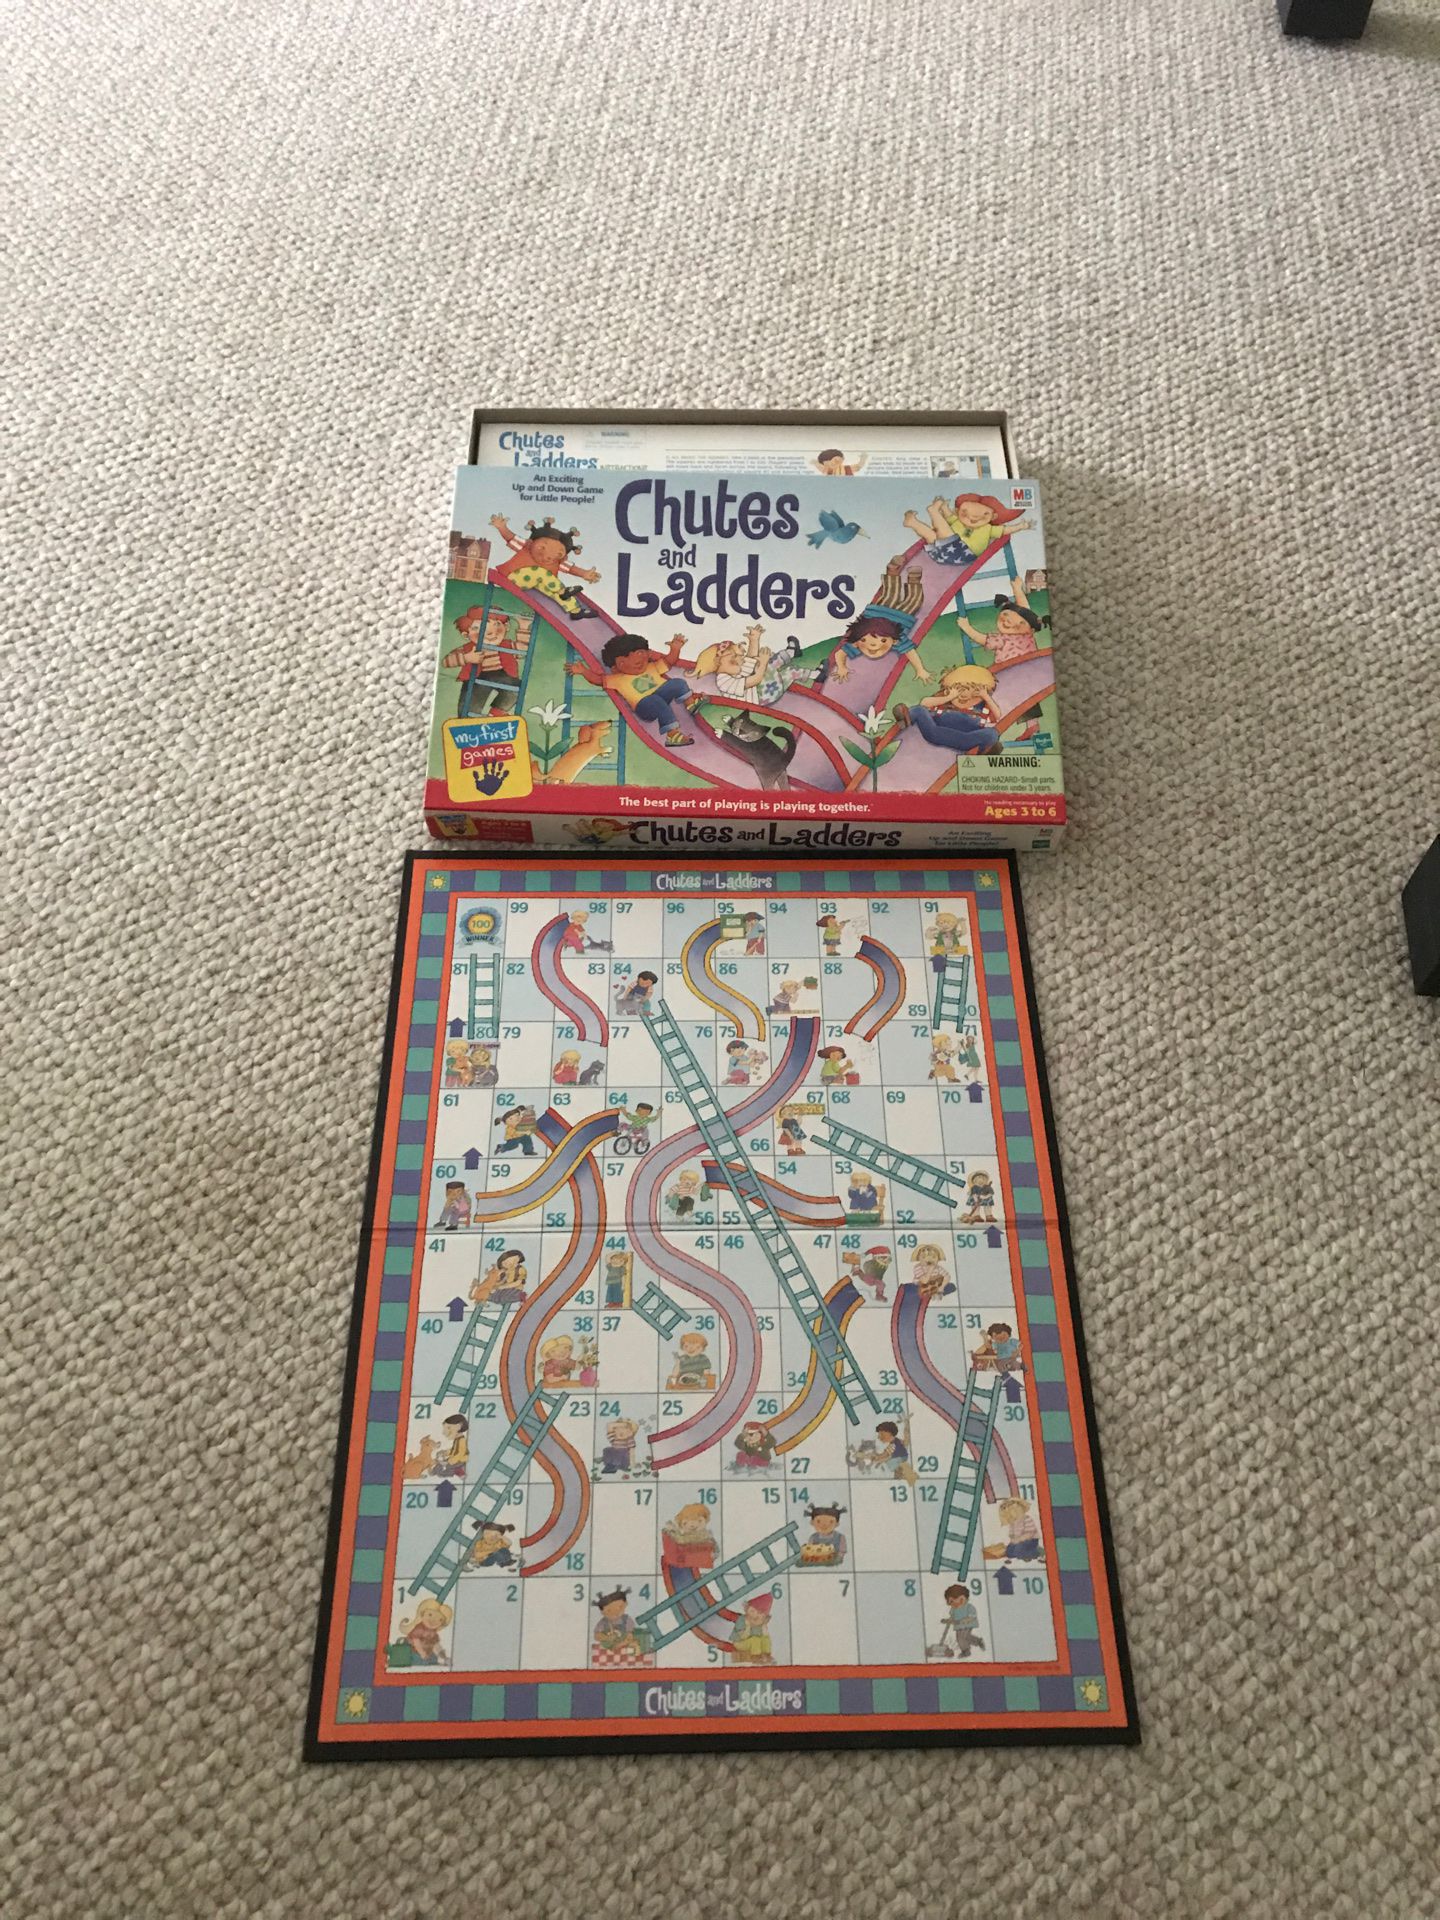 Chutes and ladders game